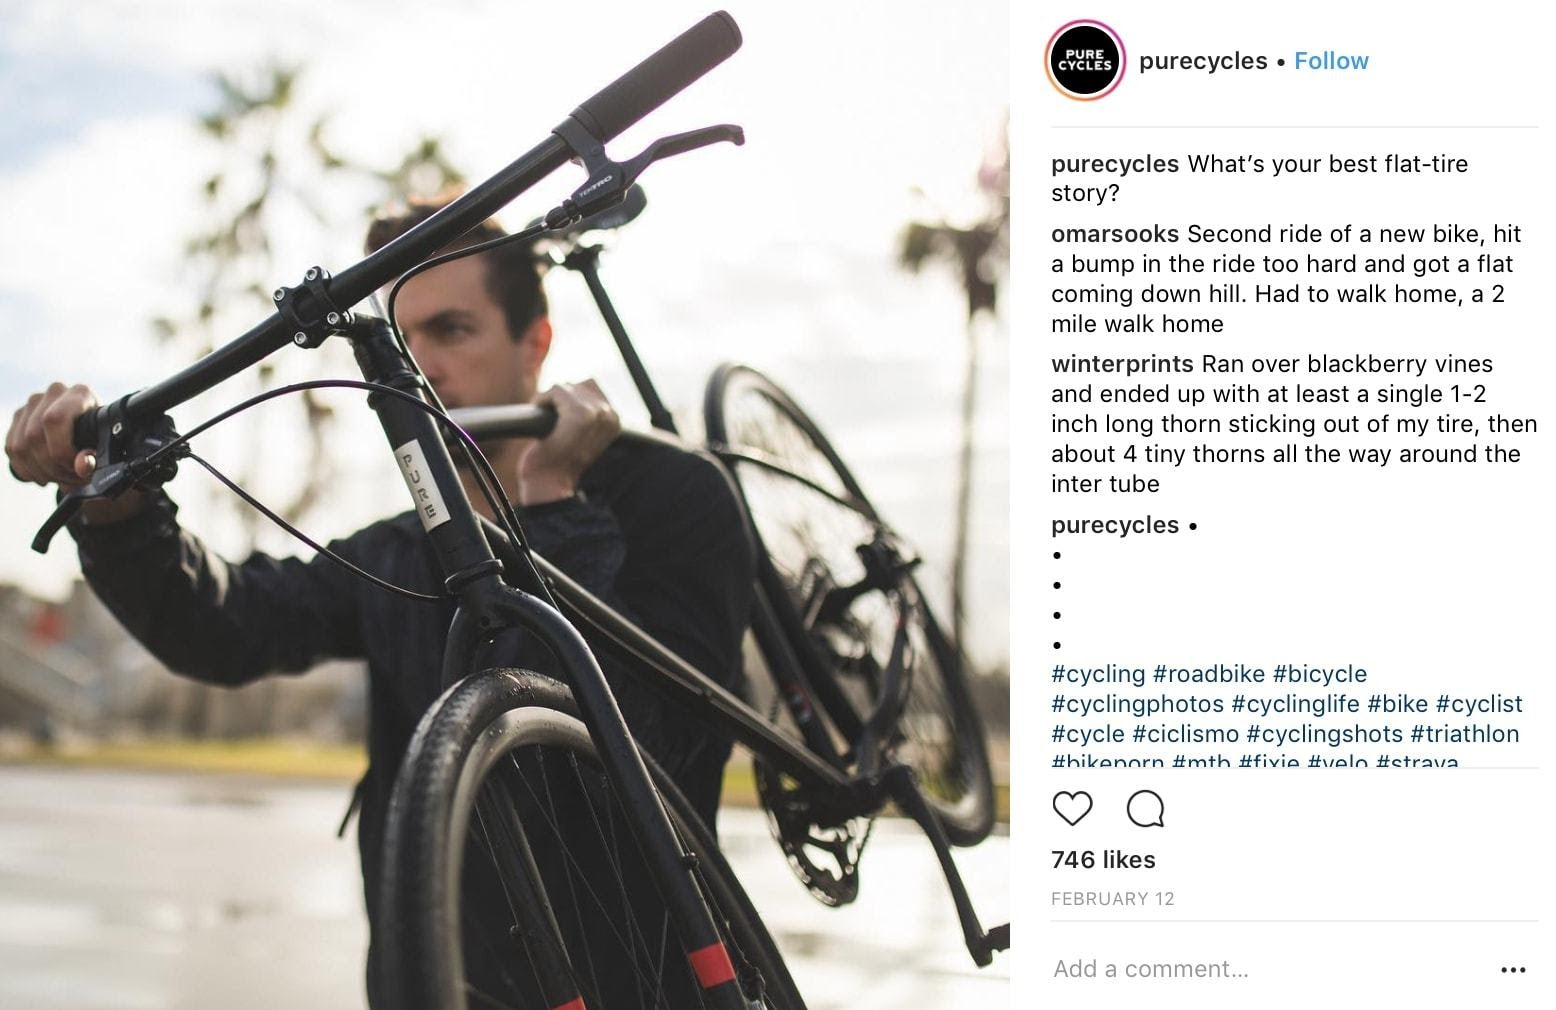 Purecycles Instagram post idea asking users to share their best flat tire stories